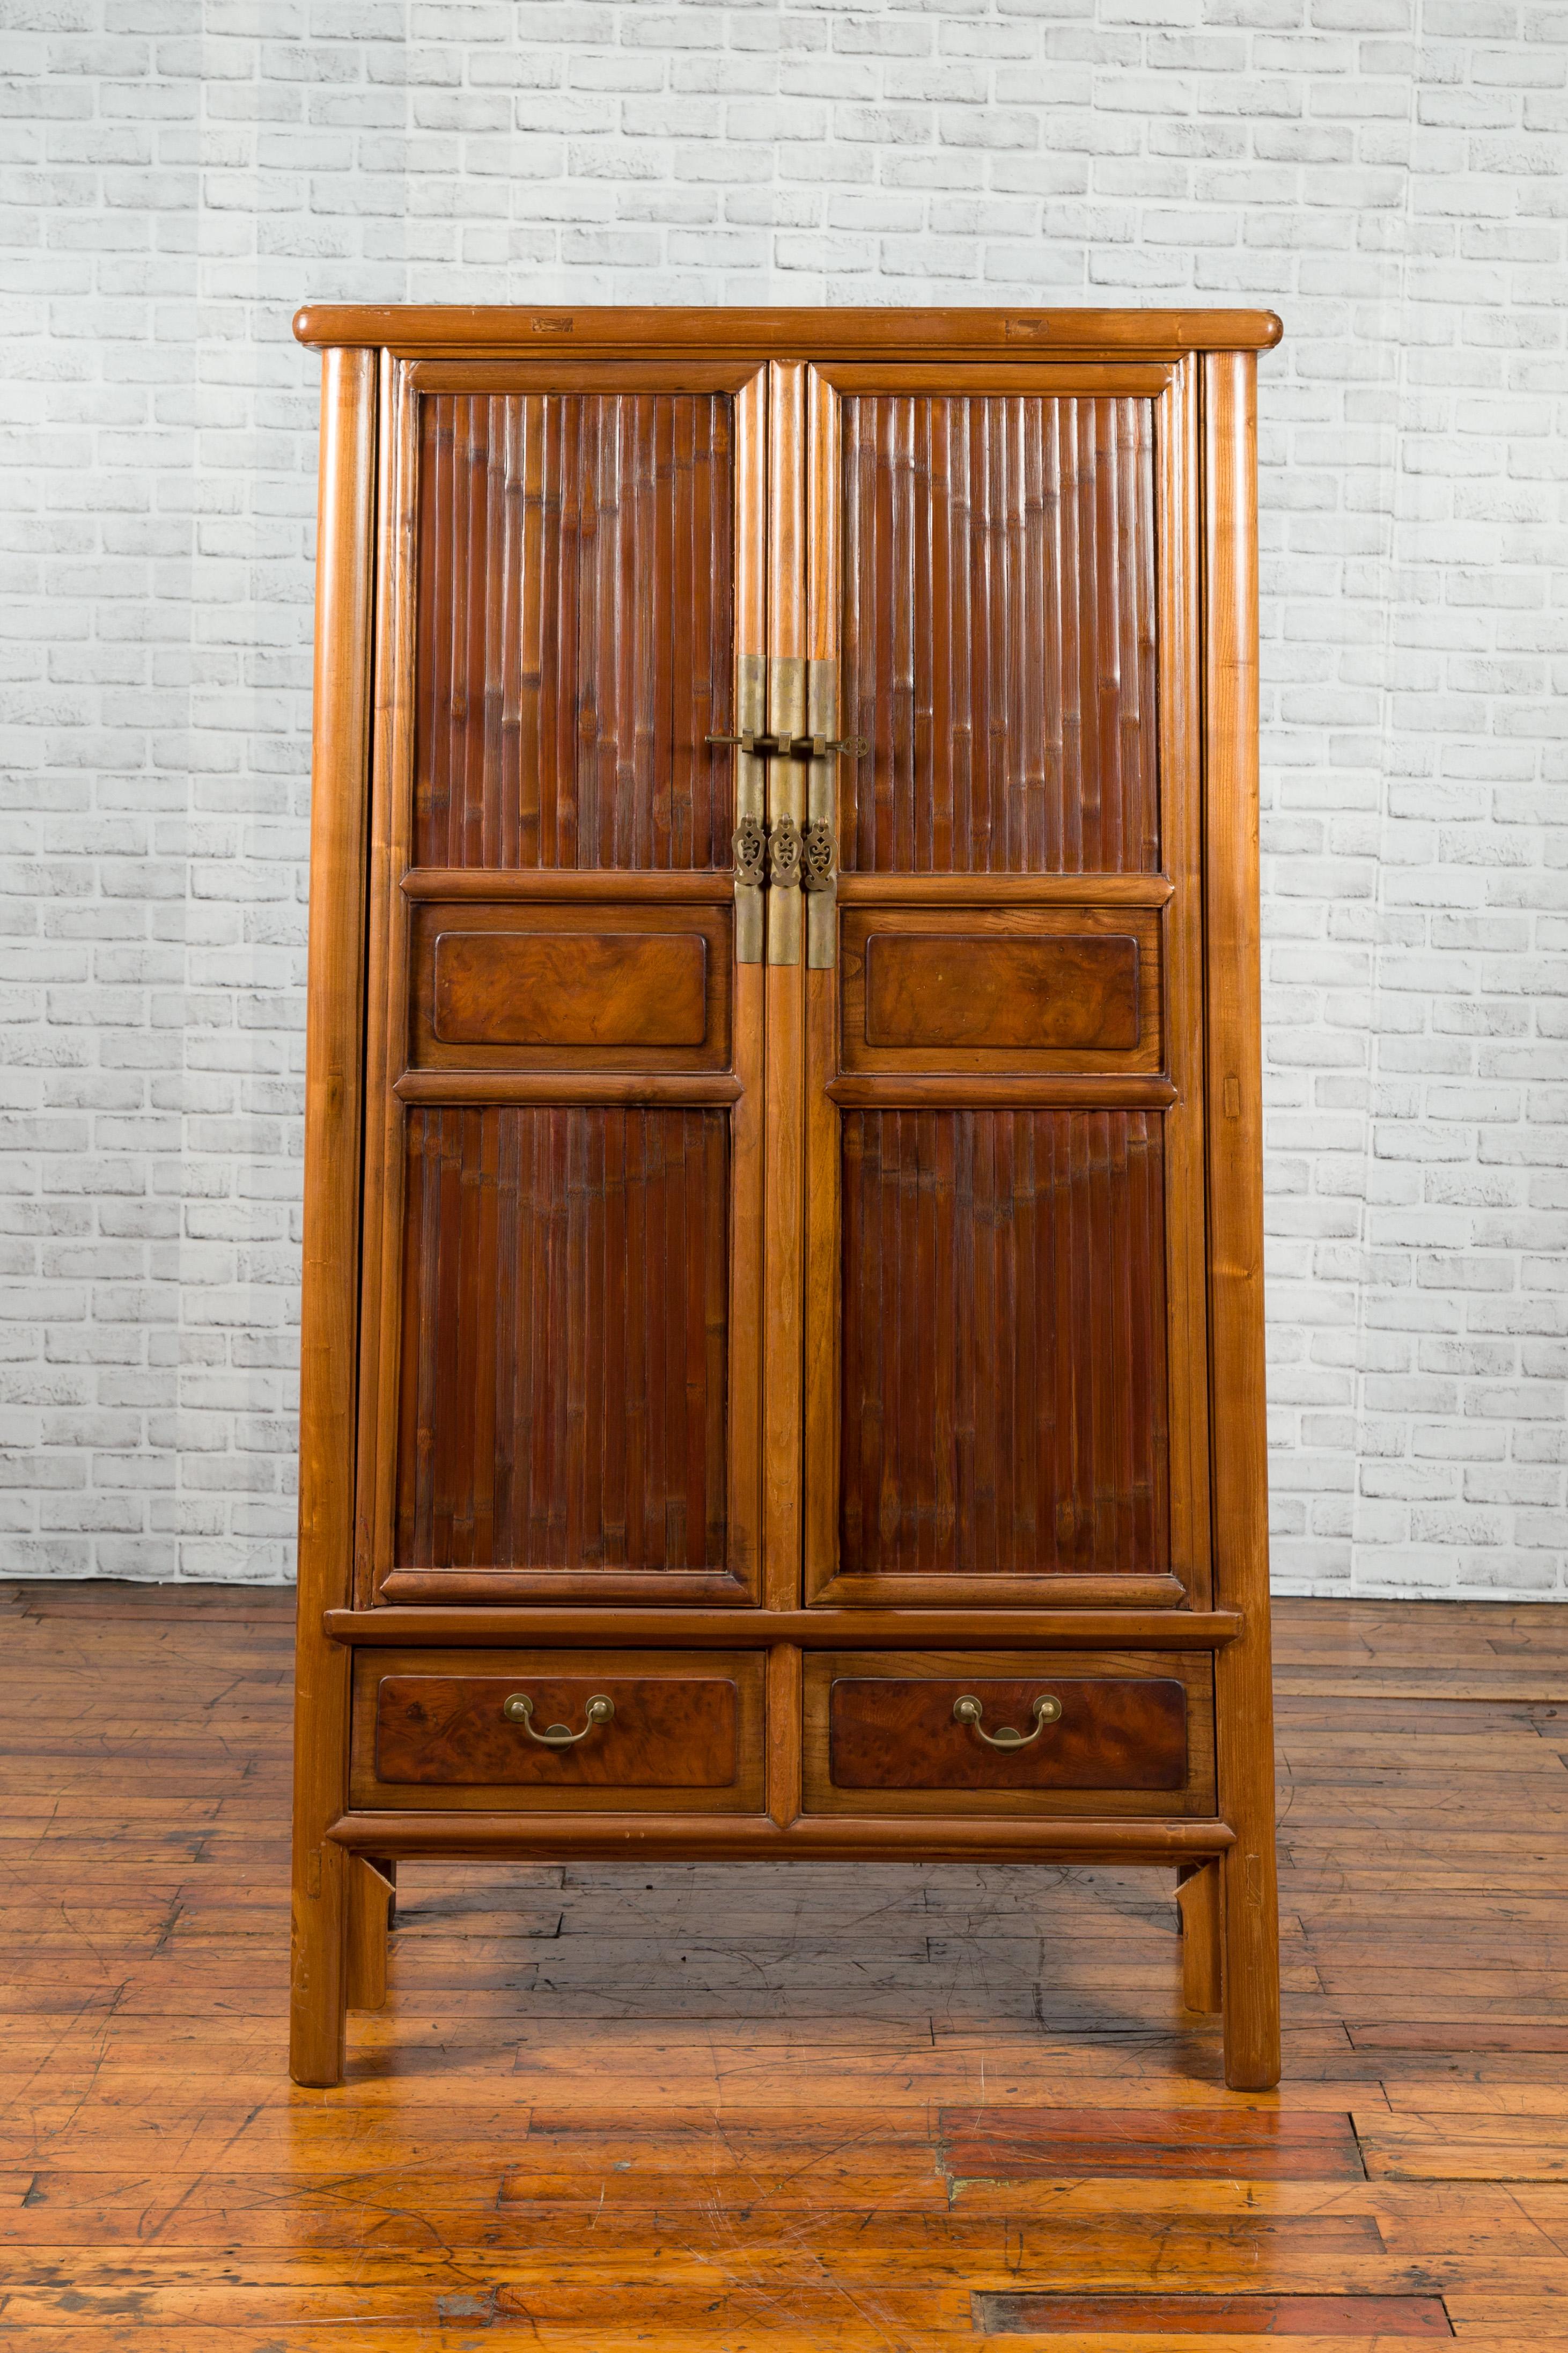 A Chinese Qing dynasty period elm cabinet from the 19th century with bamboo slats, tapered design and lower drawers. Created in China during the Qing dynasty, this elm noodle cabinet features a tapering silhouette perfectly adorned with bamboo slats